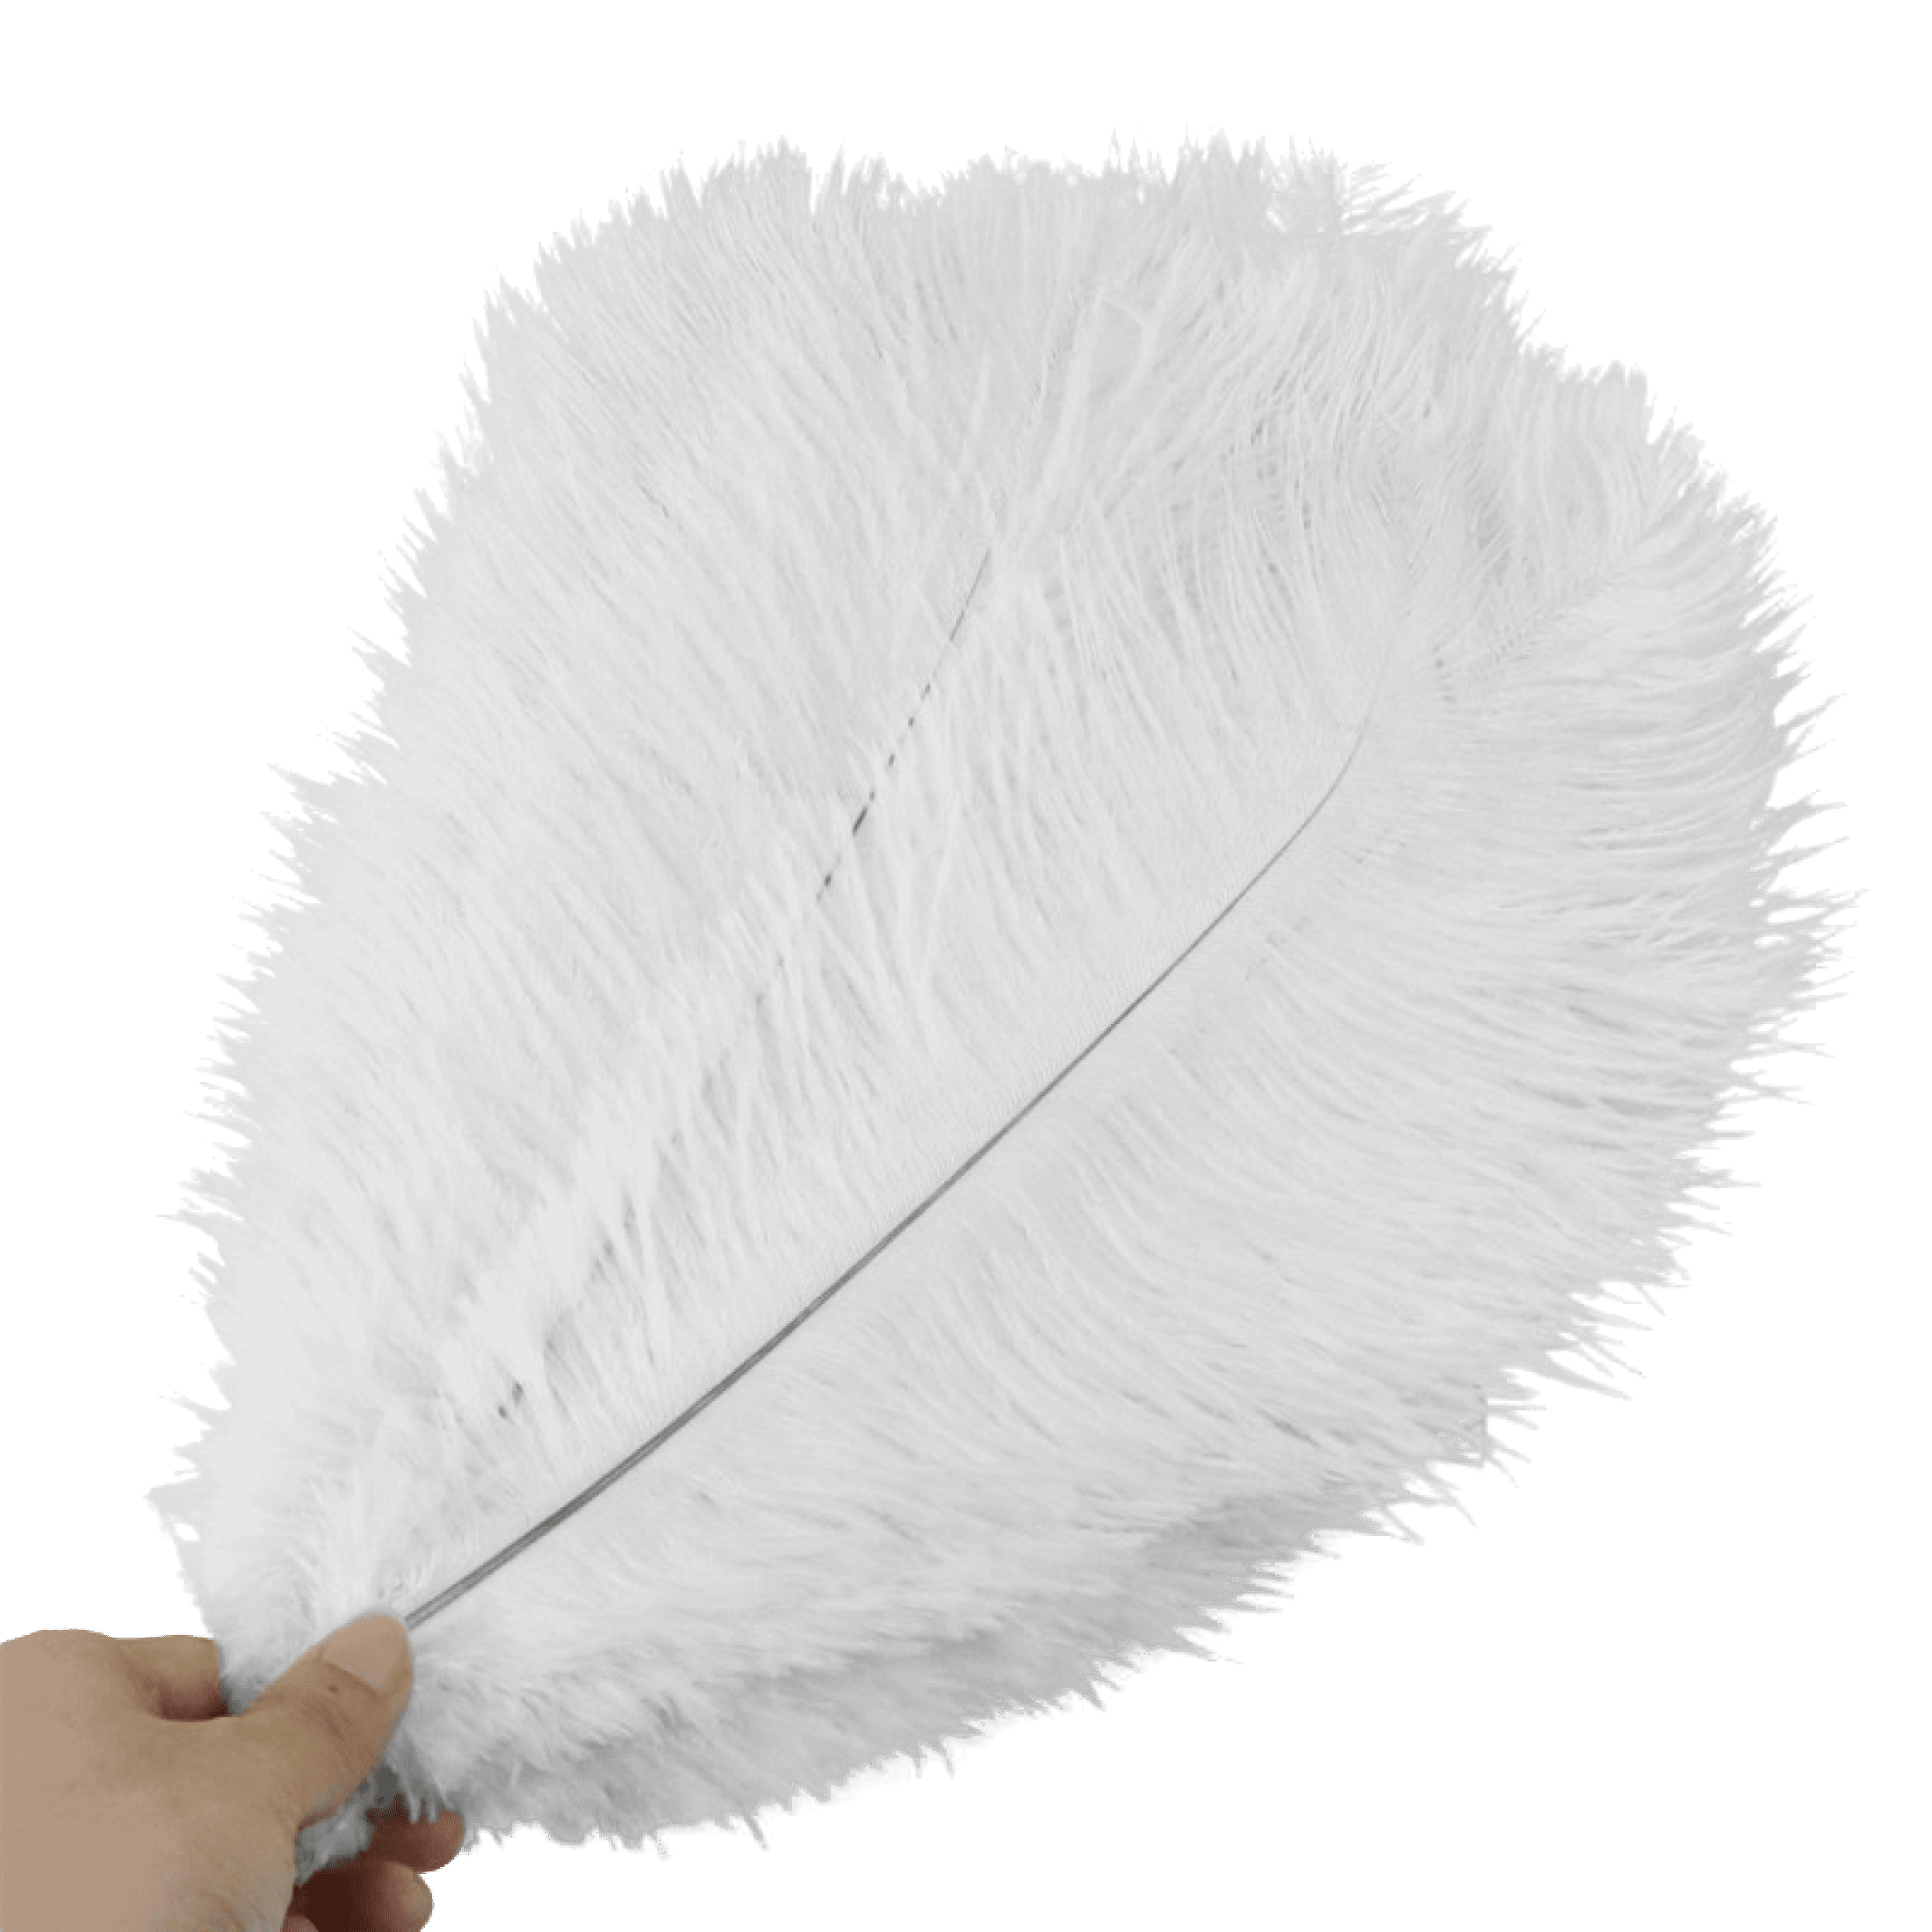 5 Pcs Elegant 50-55Cm Ostrich Feathers For Crafts WeddingParty Supplies  Carnival